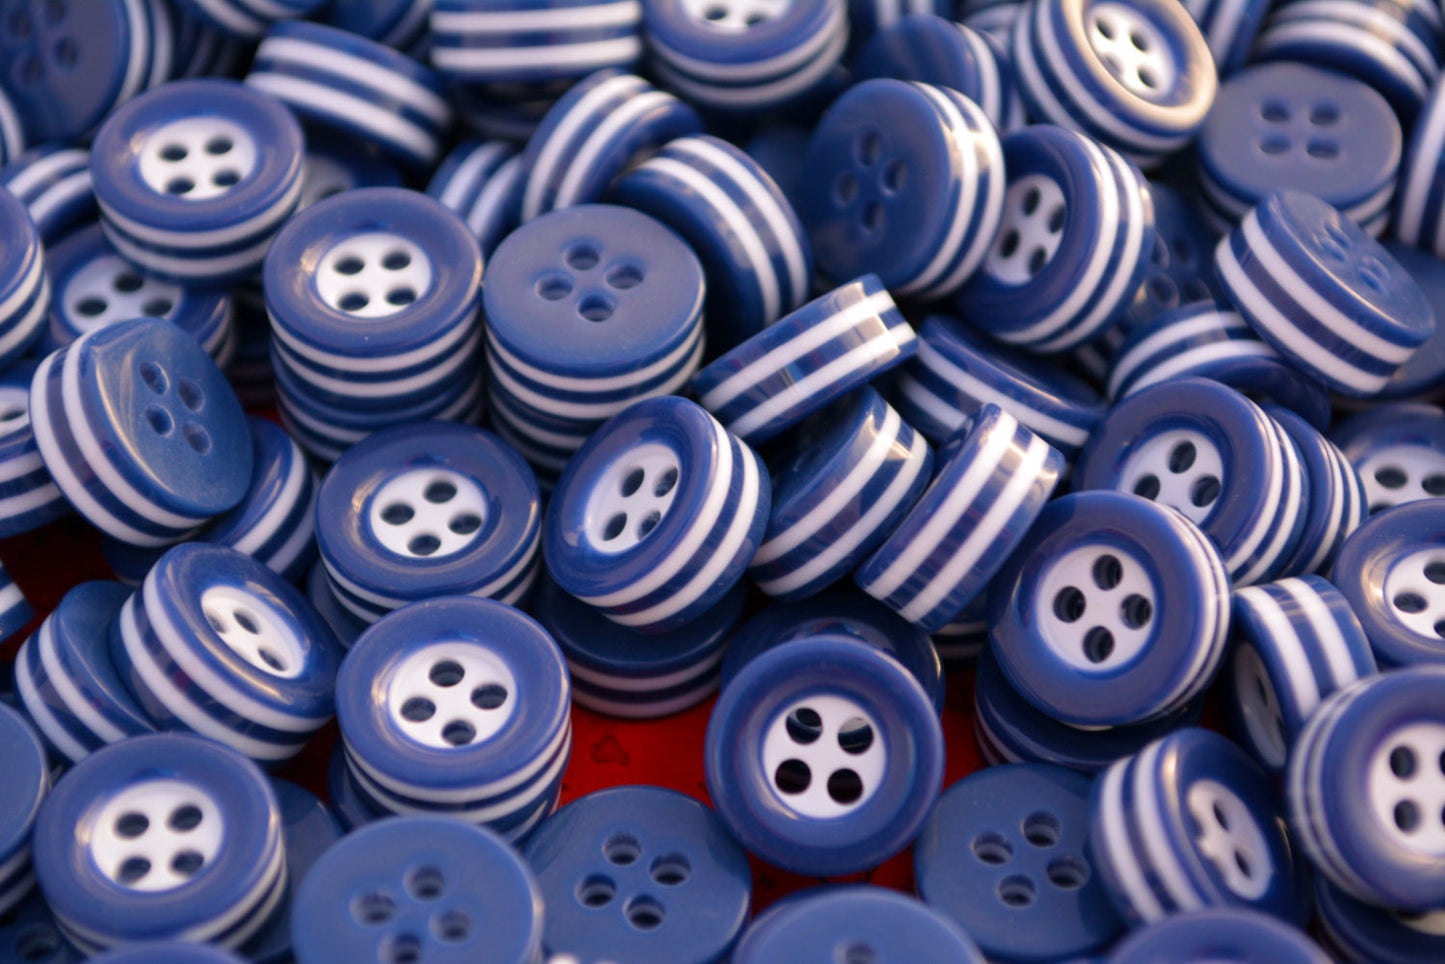 20 white and blue STRIPED BUTTONS - 5mm thick! - choose from sizes 18L 16L - great quality - Made in ITALY